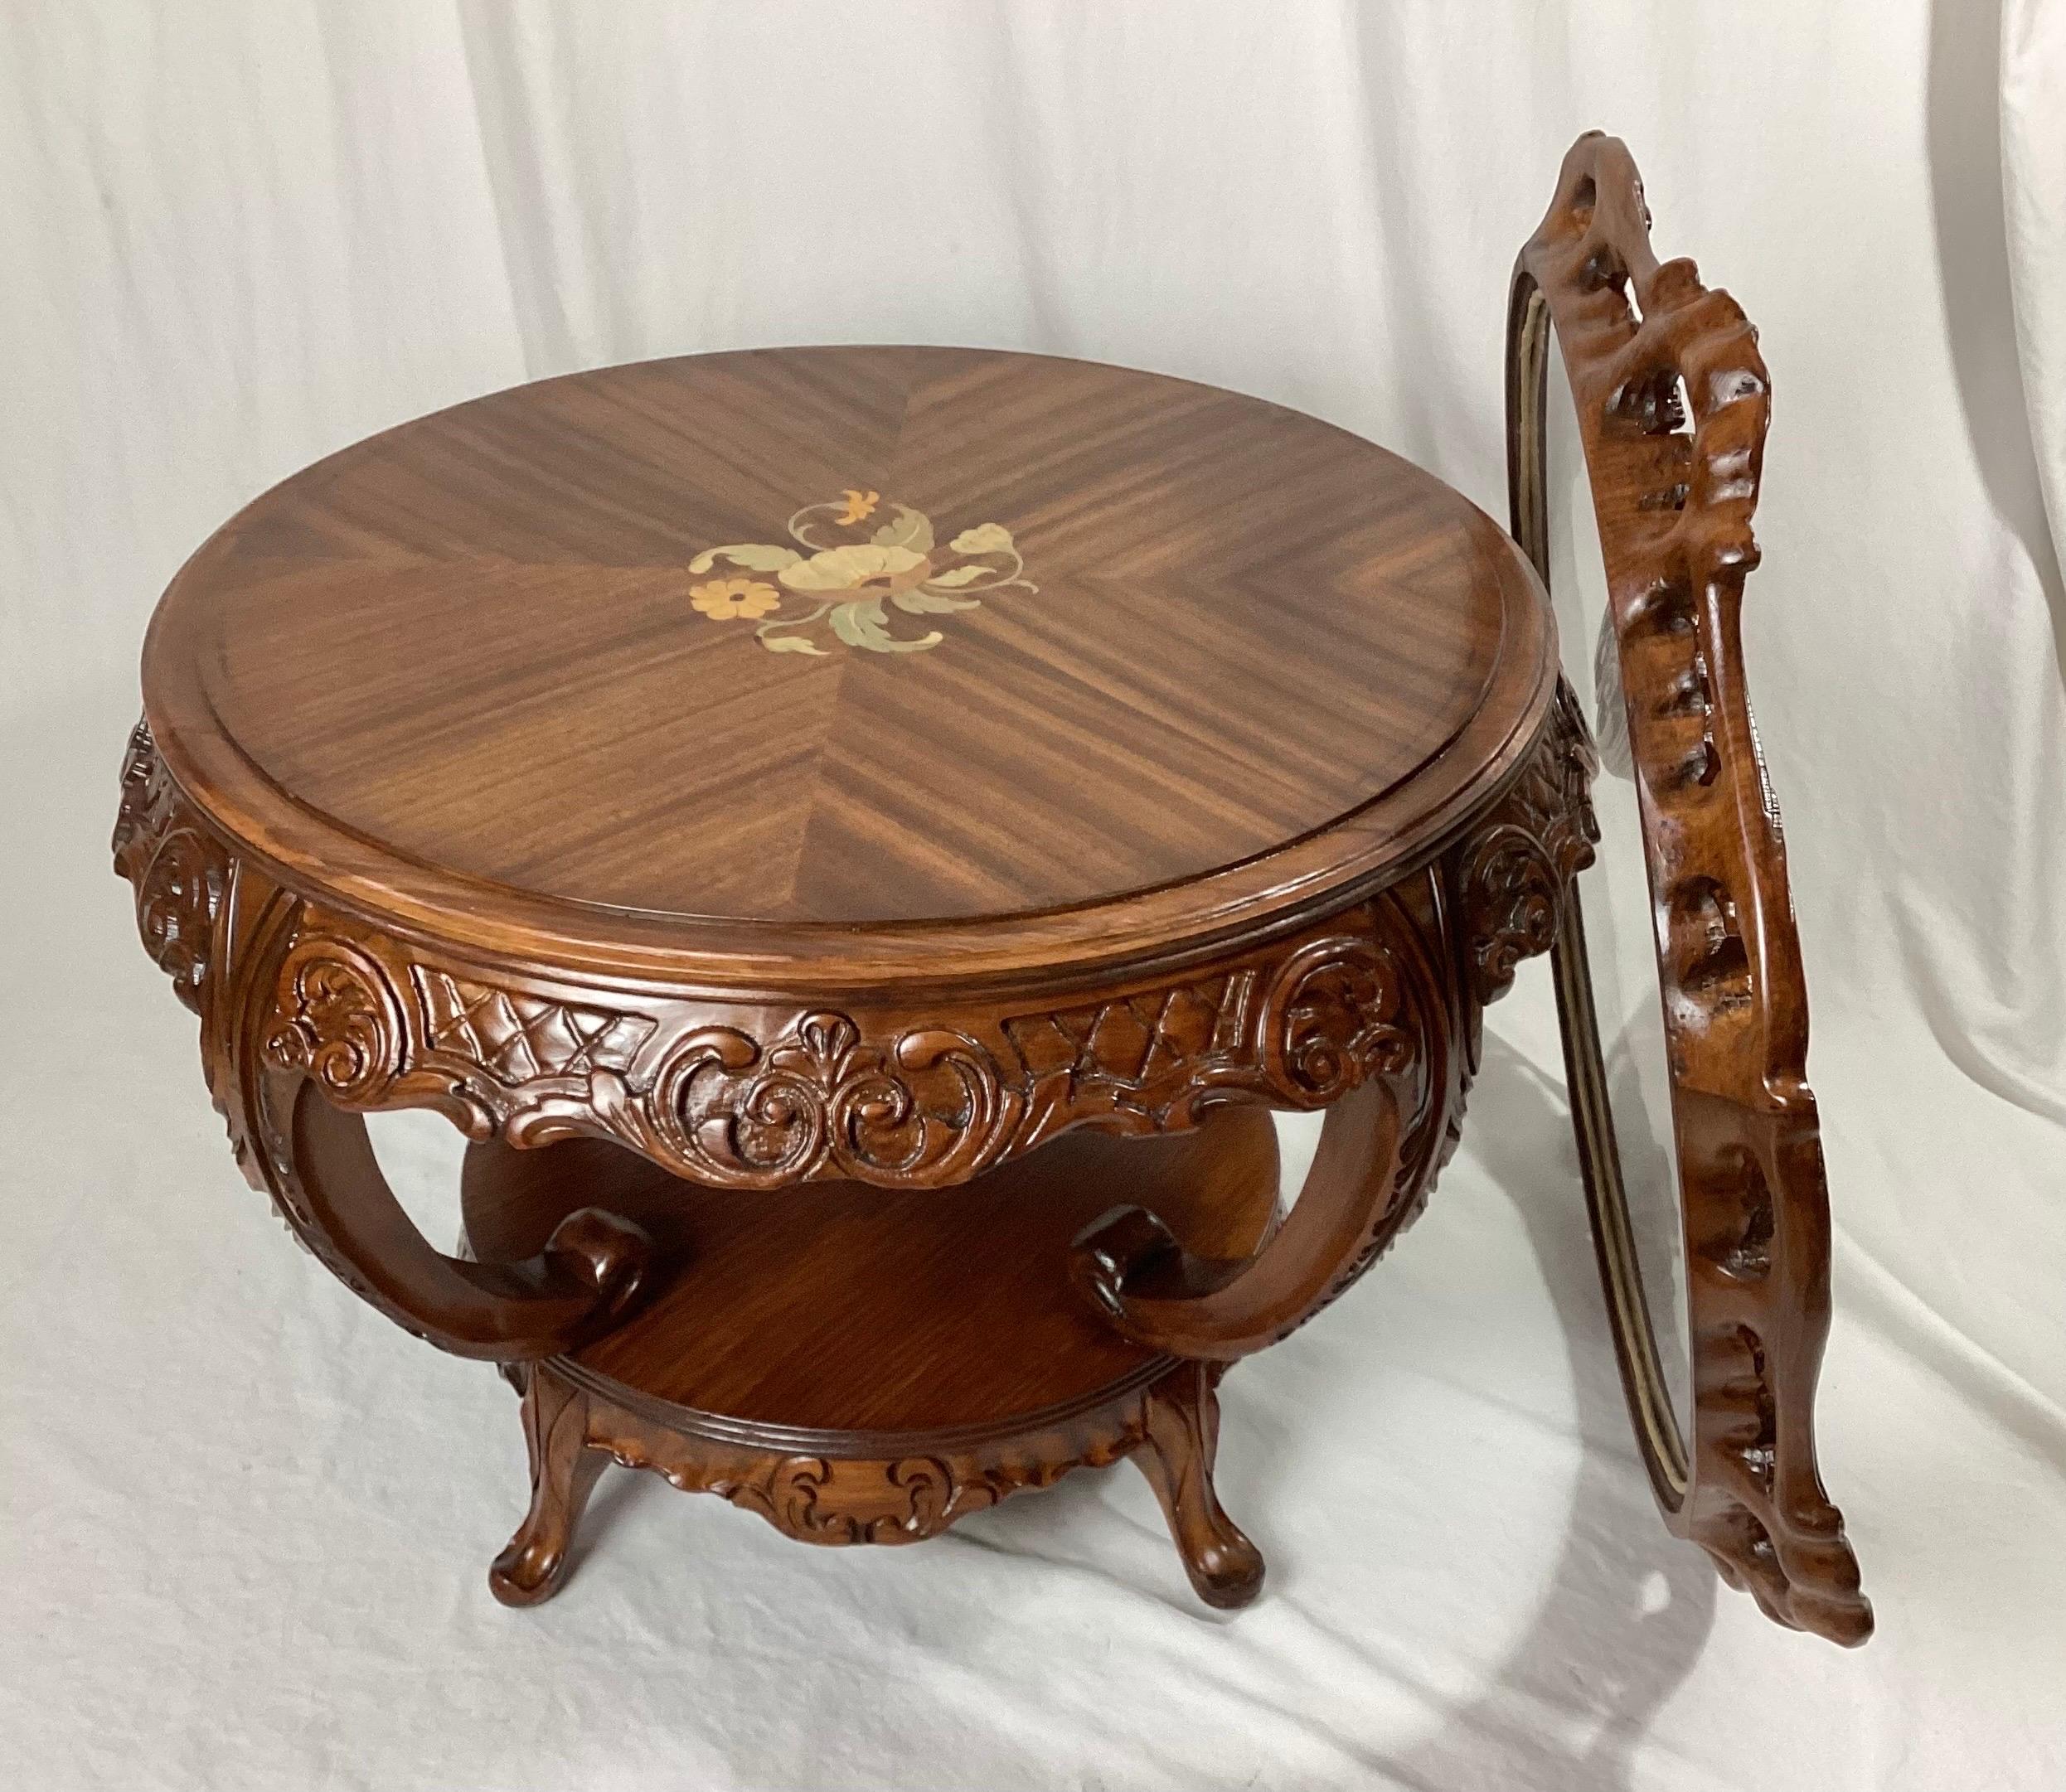 Satinwood Inlaid Coffee Table with Lazy Susan Tray Table In Excellent Condition For Sale In Lambertville, NJ